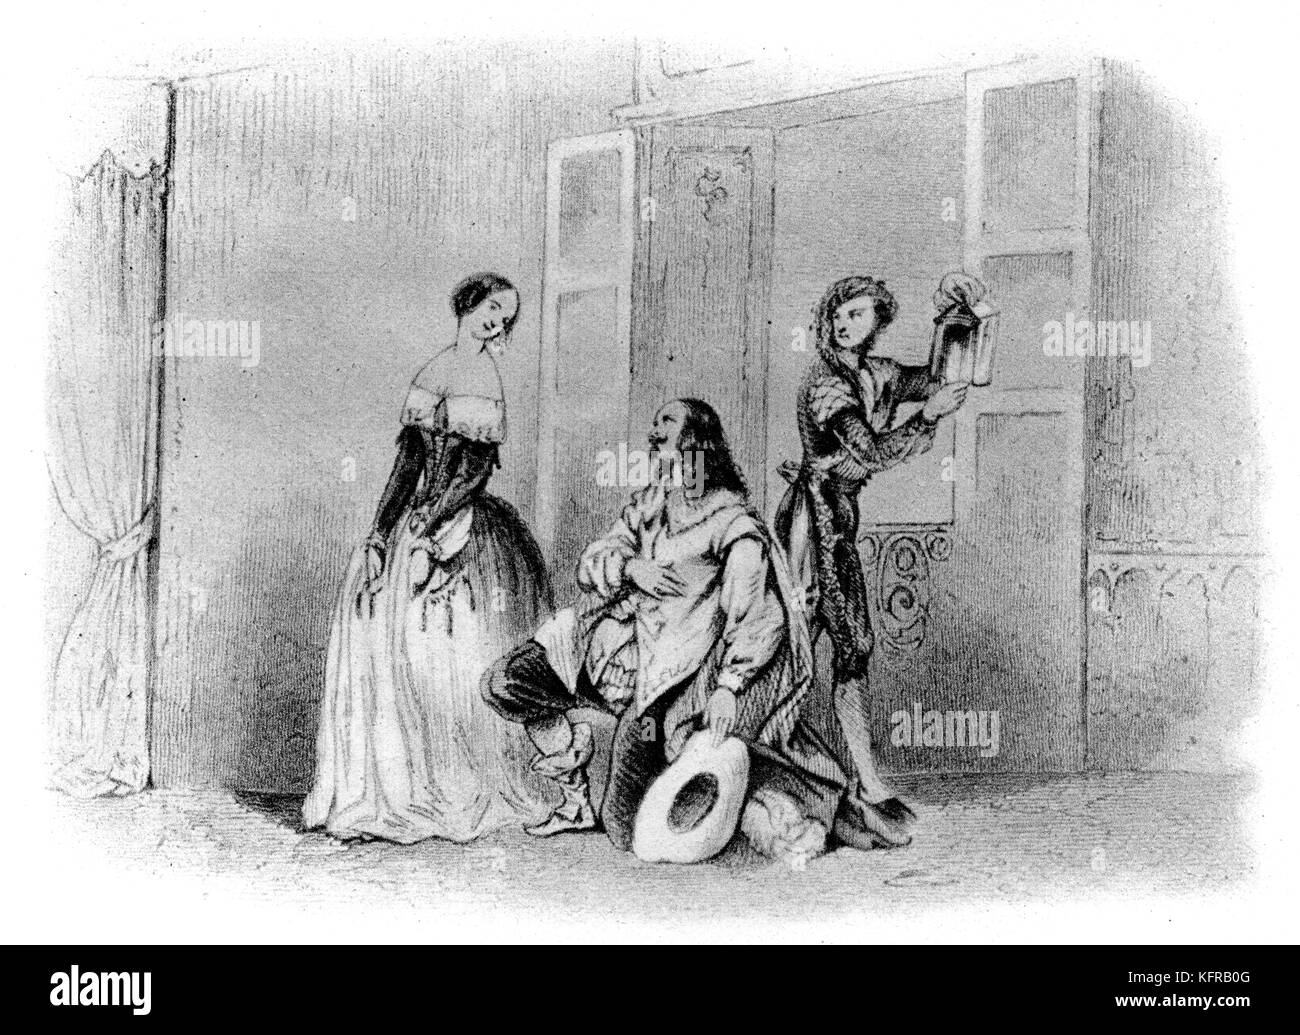 Design for The Barber of Seville, an opera buffa in two acts by Gioachino Rossini, based on the opéra comique, Le Barbier de Séville. Stock Photo